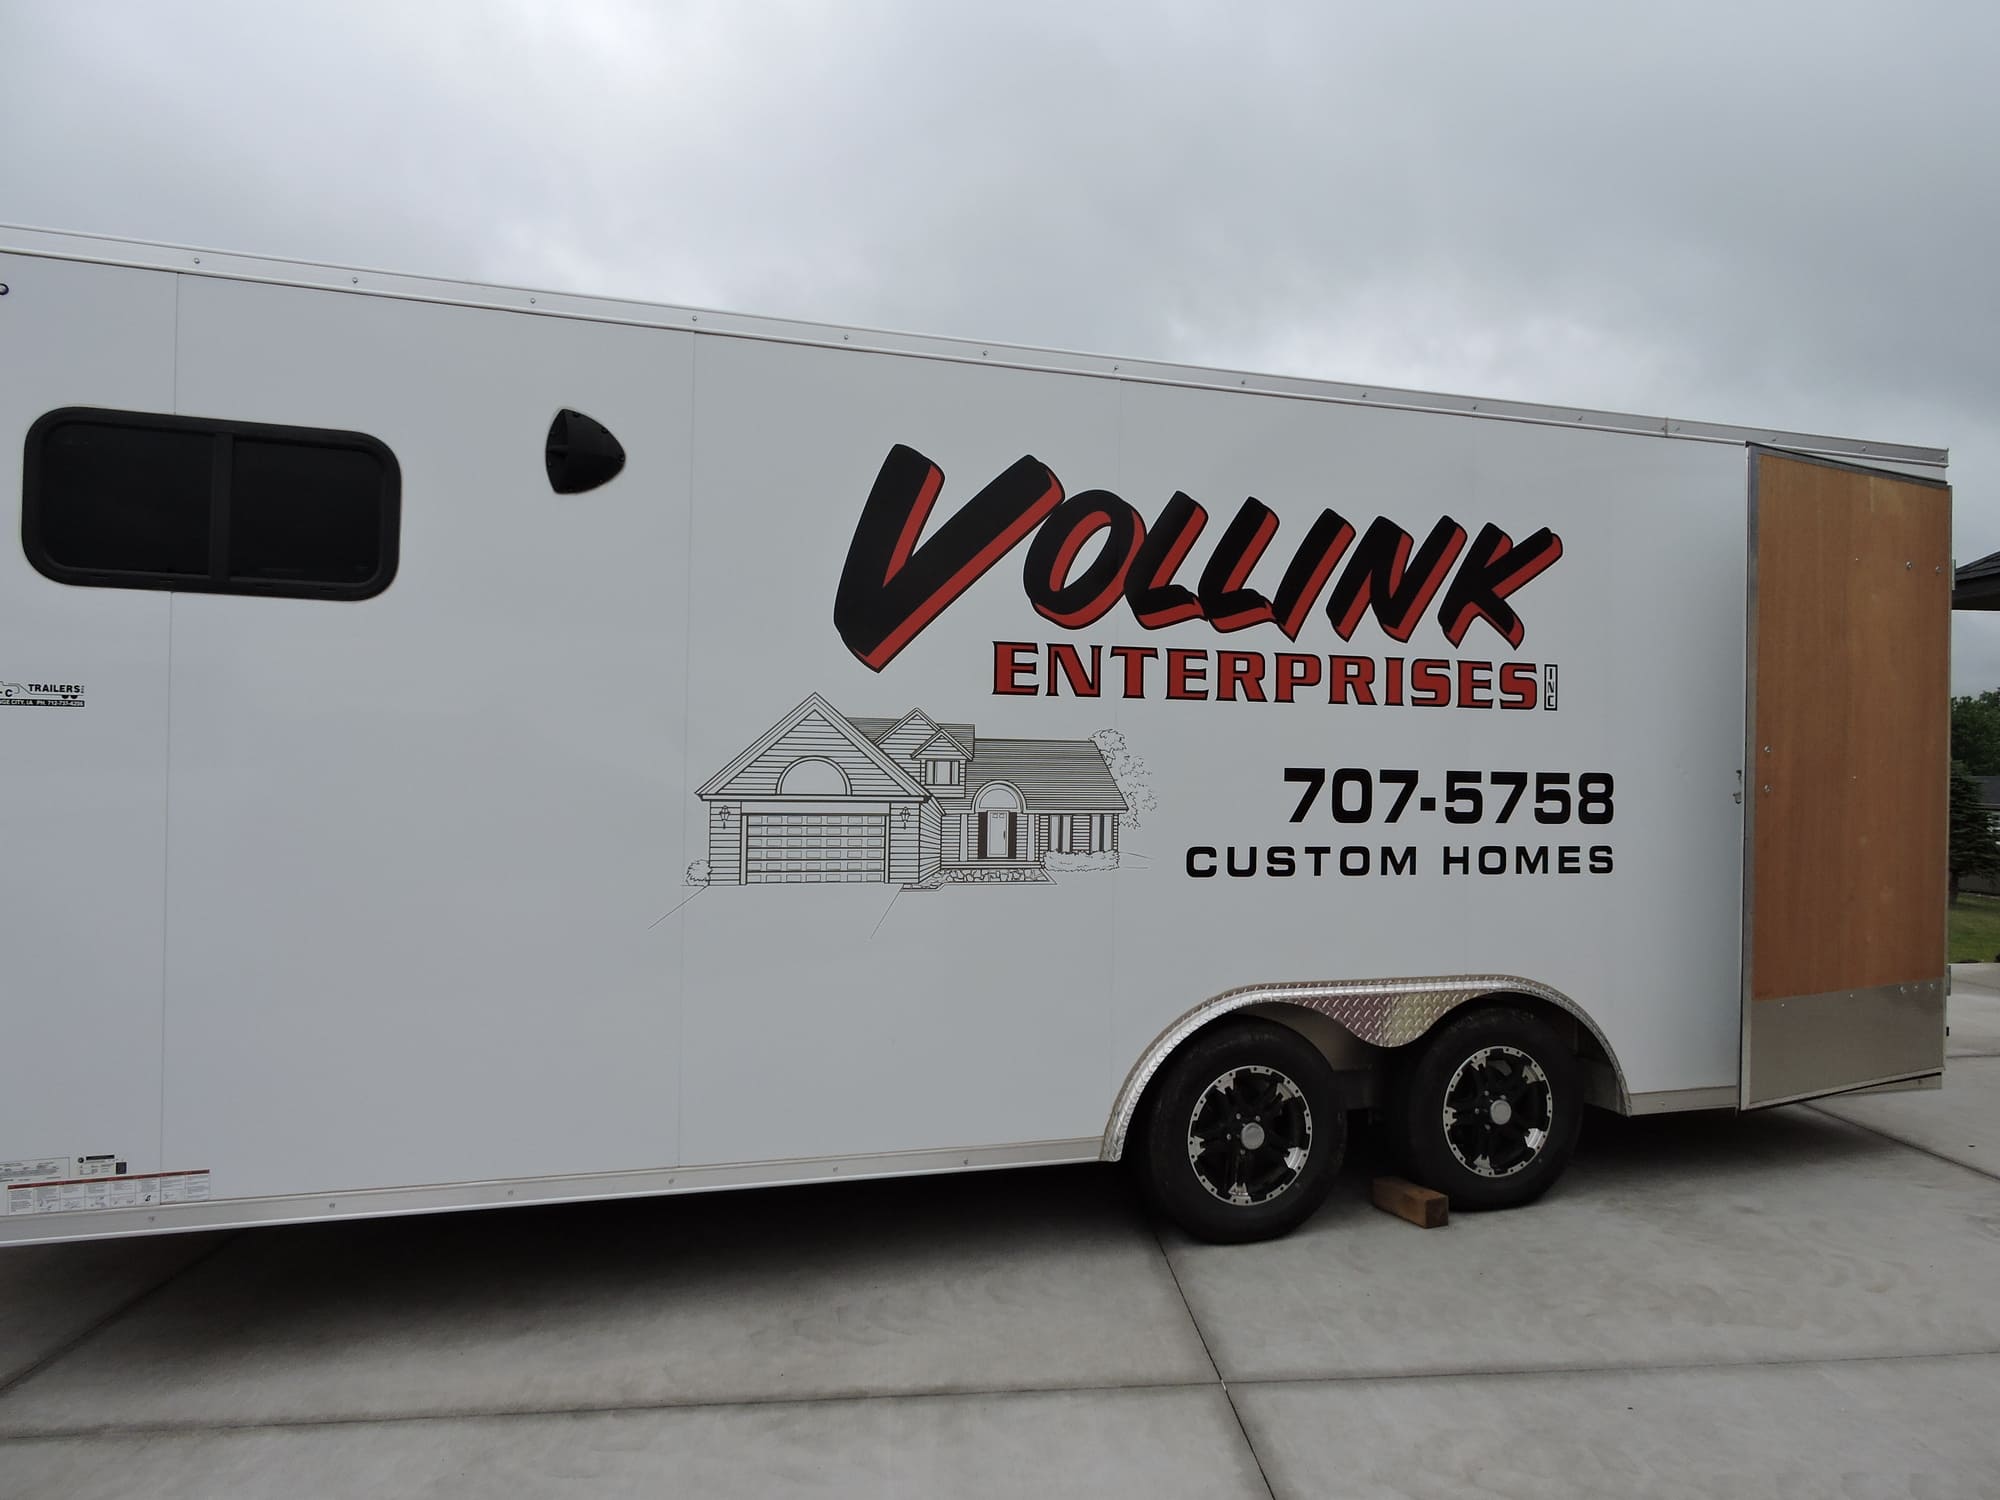 Vollink Construction: Turning Your Visions Into Reality